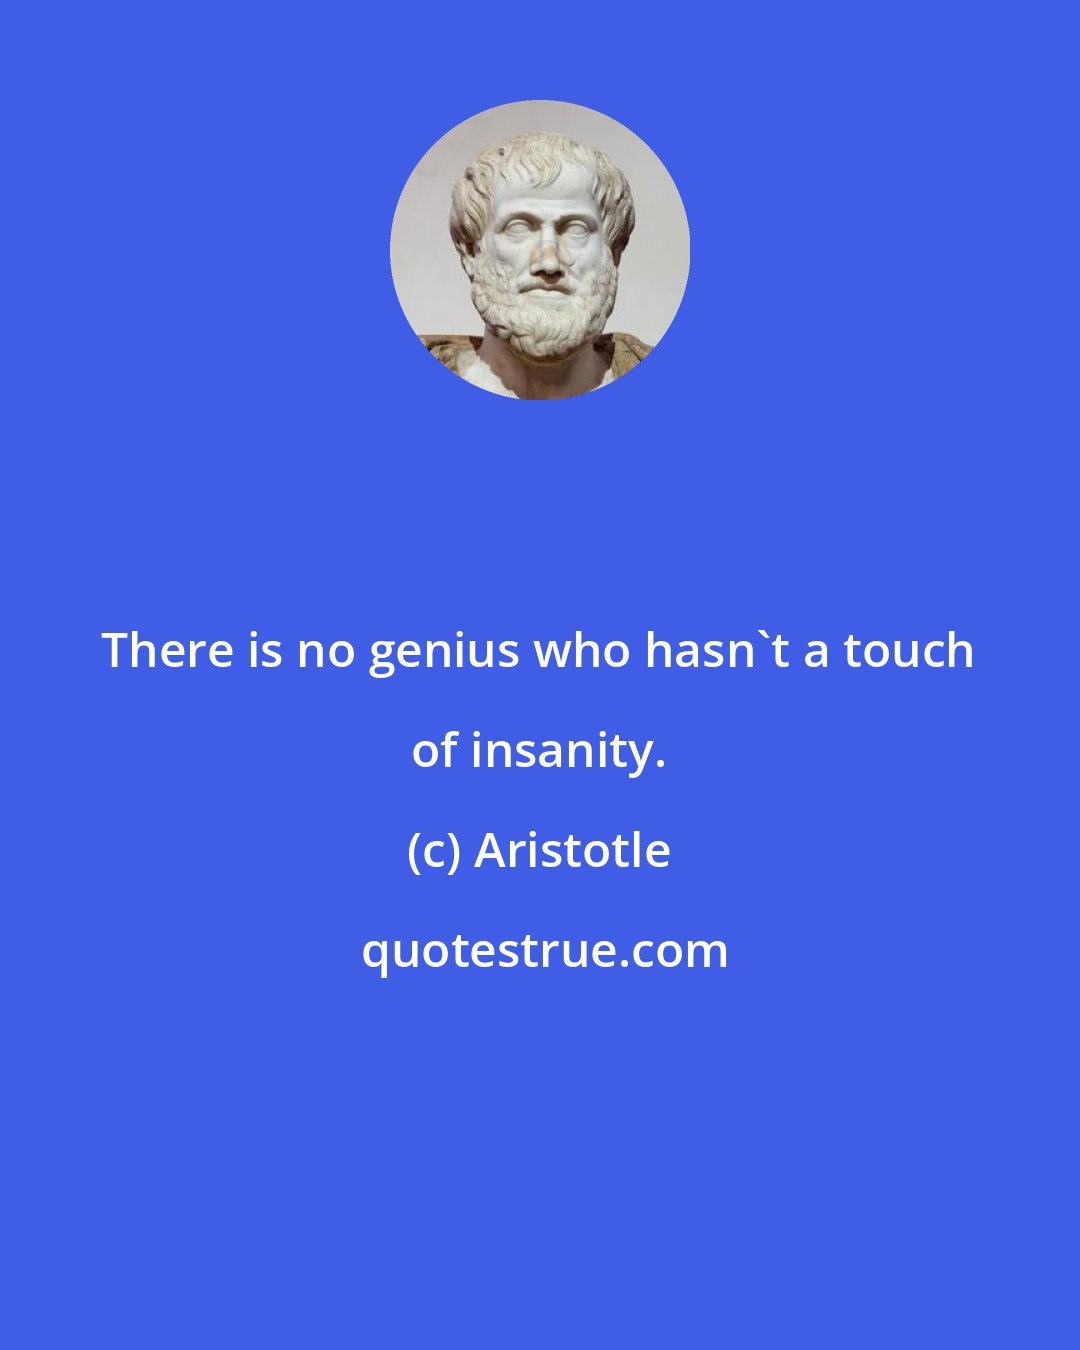 Aristotle: There is no genius who hasn't a touch of insanity.